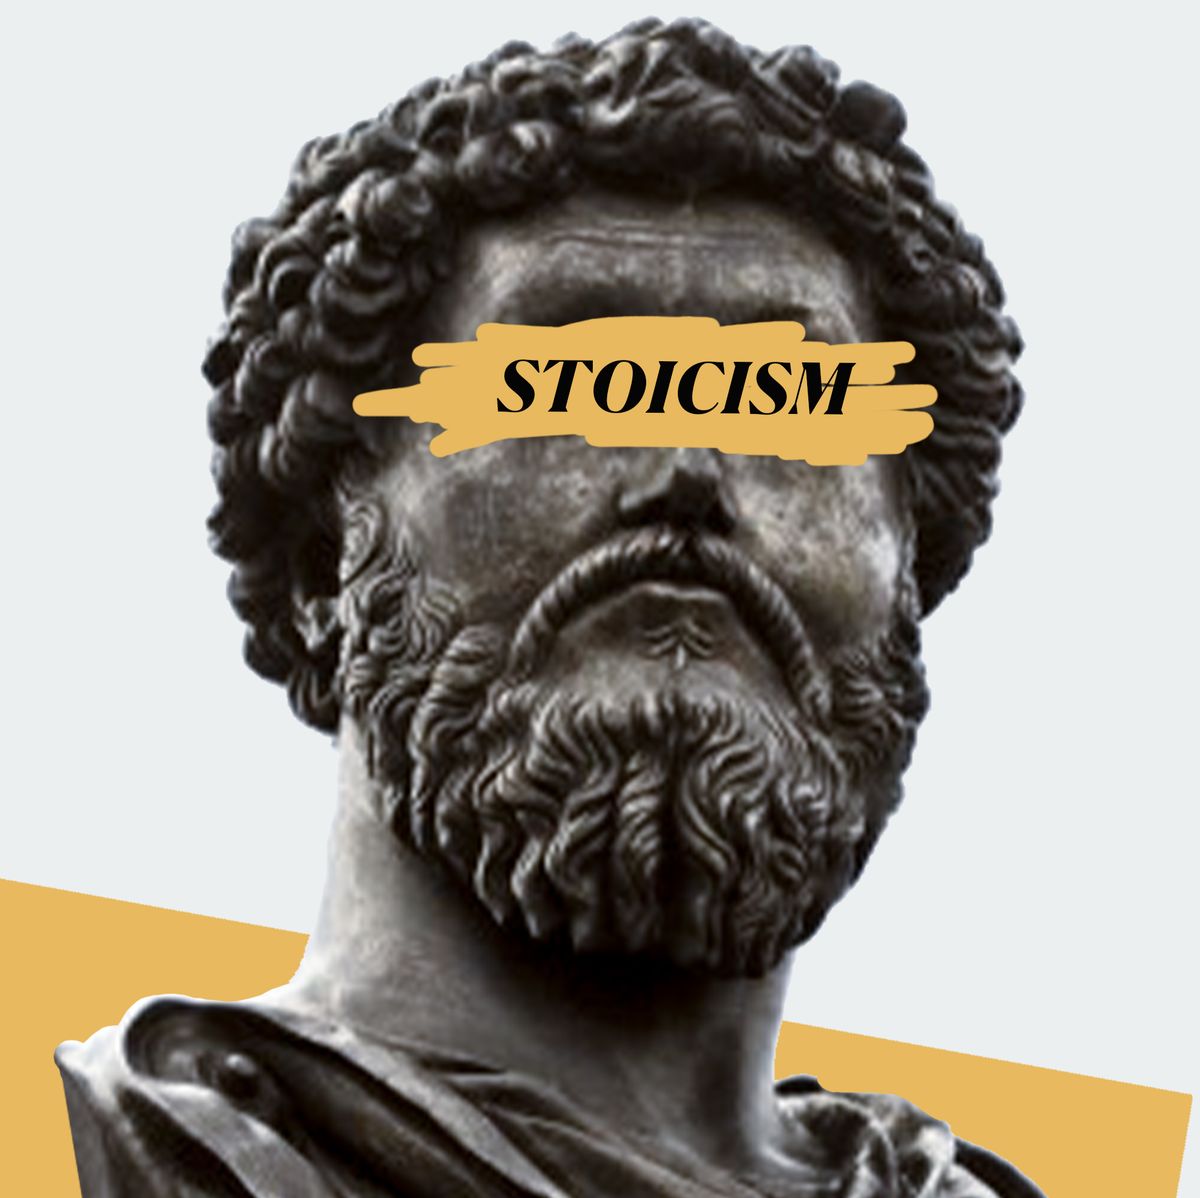 How I Overcame Honors Precalculus With Stoicism